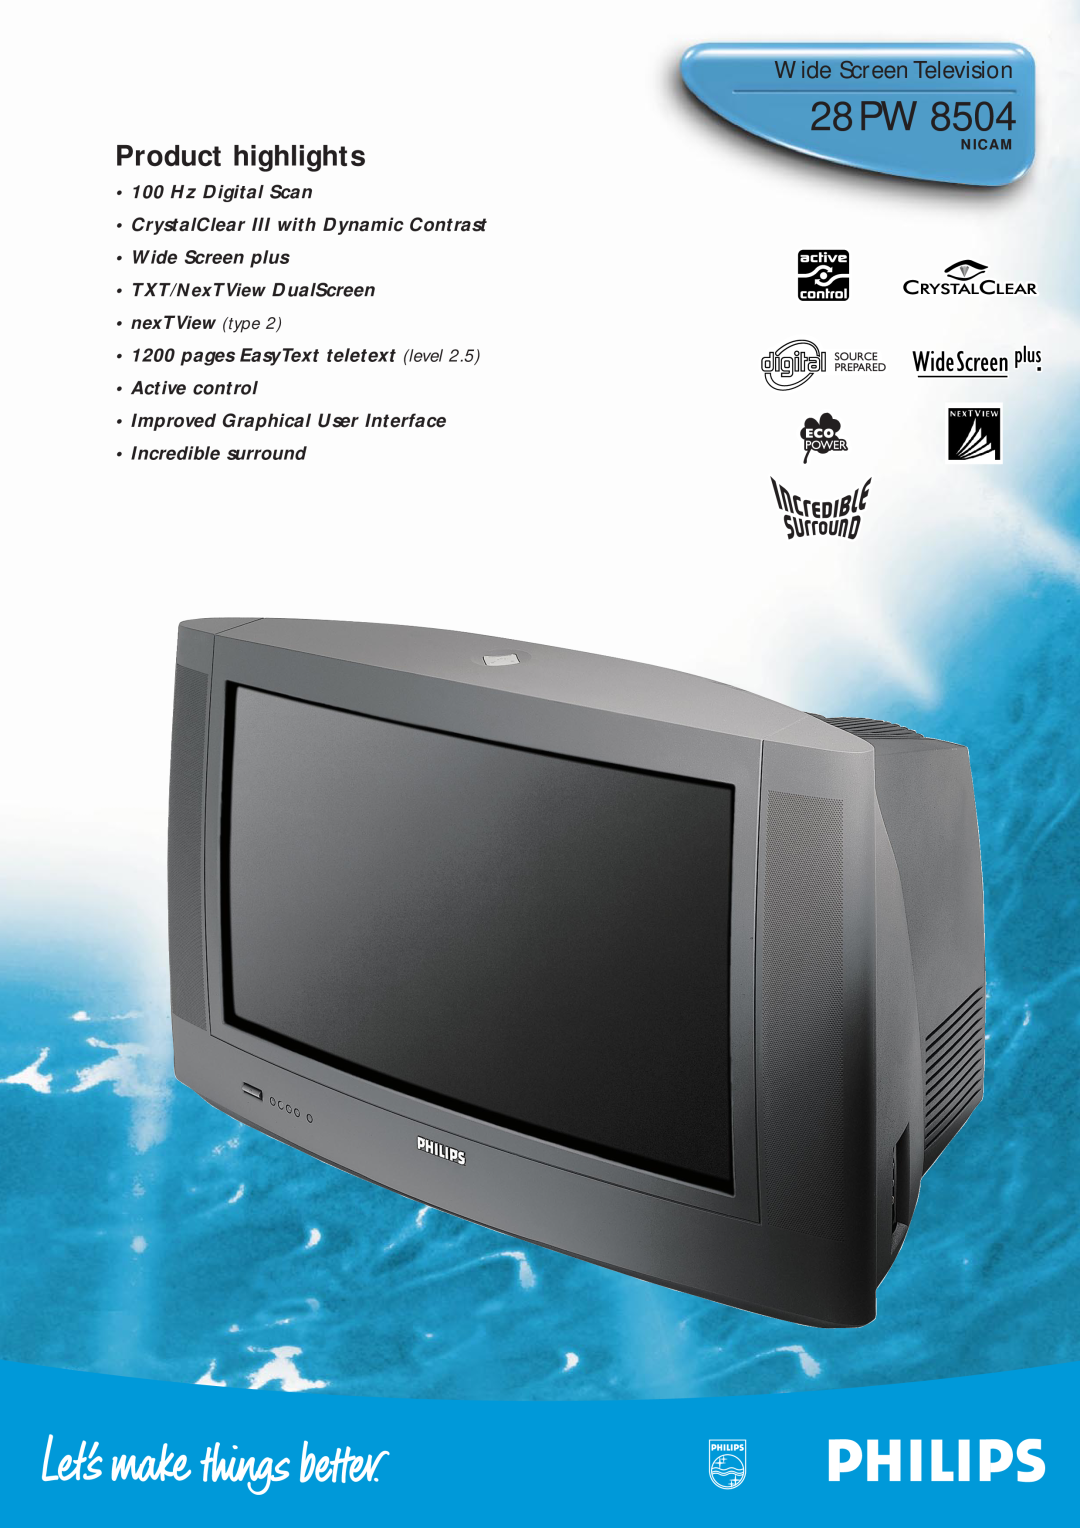 Philips 28PW8504 manual 28 PW, Product highlights, Wide Screen Television, Wide Screen plus TXT/NexTView DualScreen, Nicam 